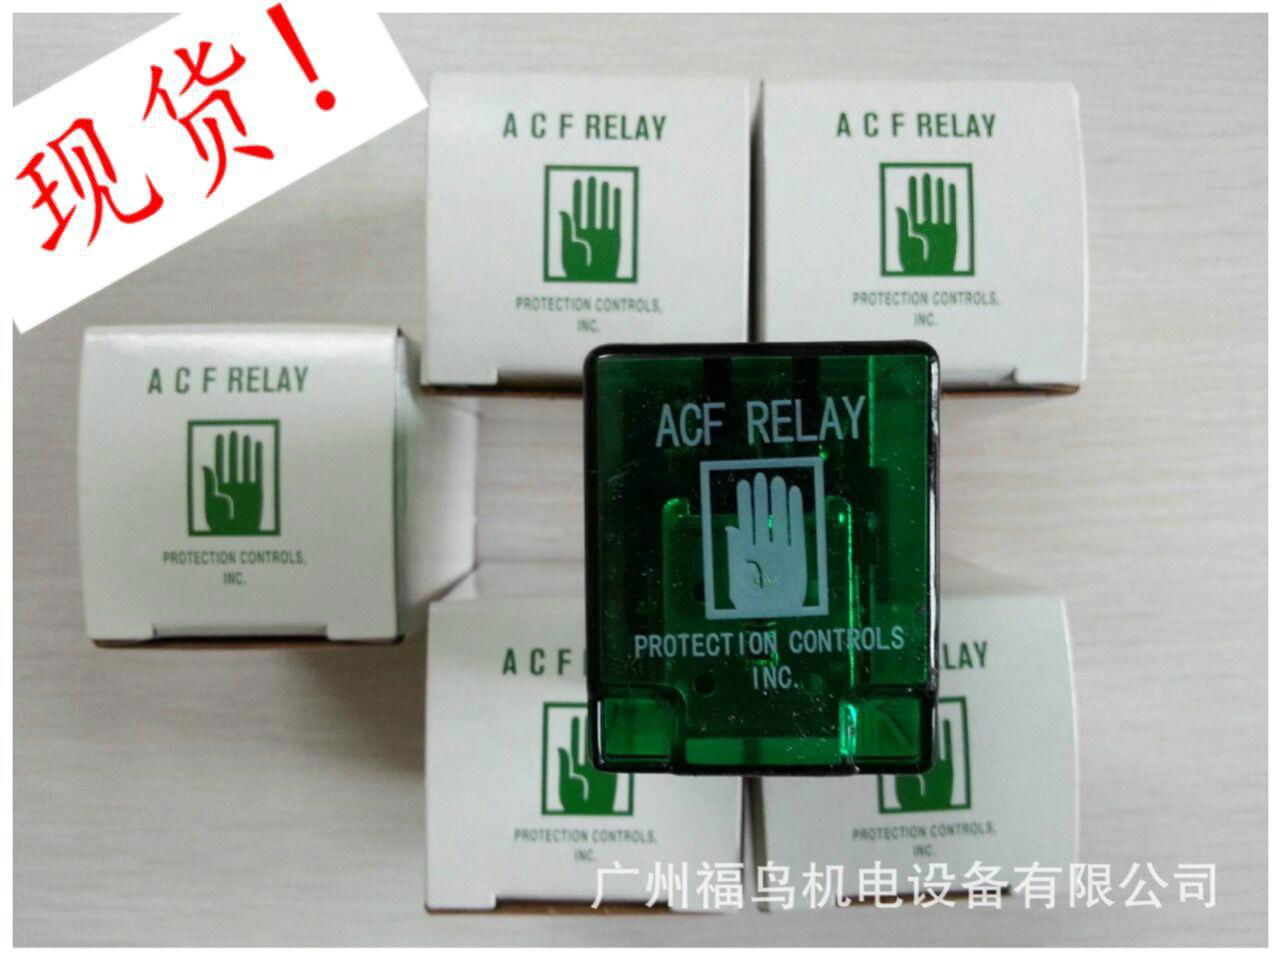 PROTECTION CONTROLS繼電器, 型號: ACF RELAY